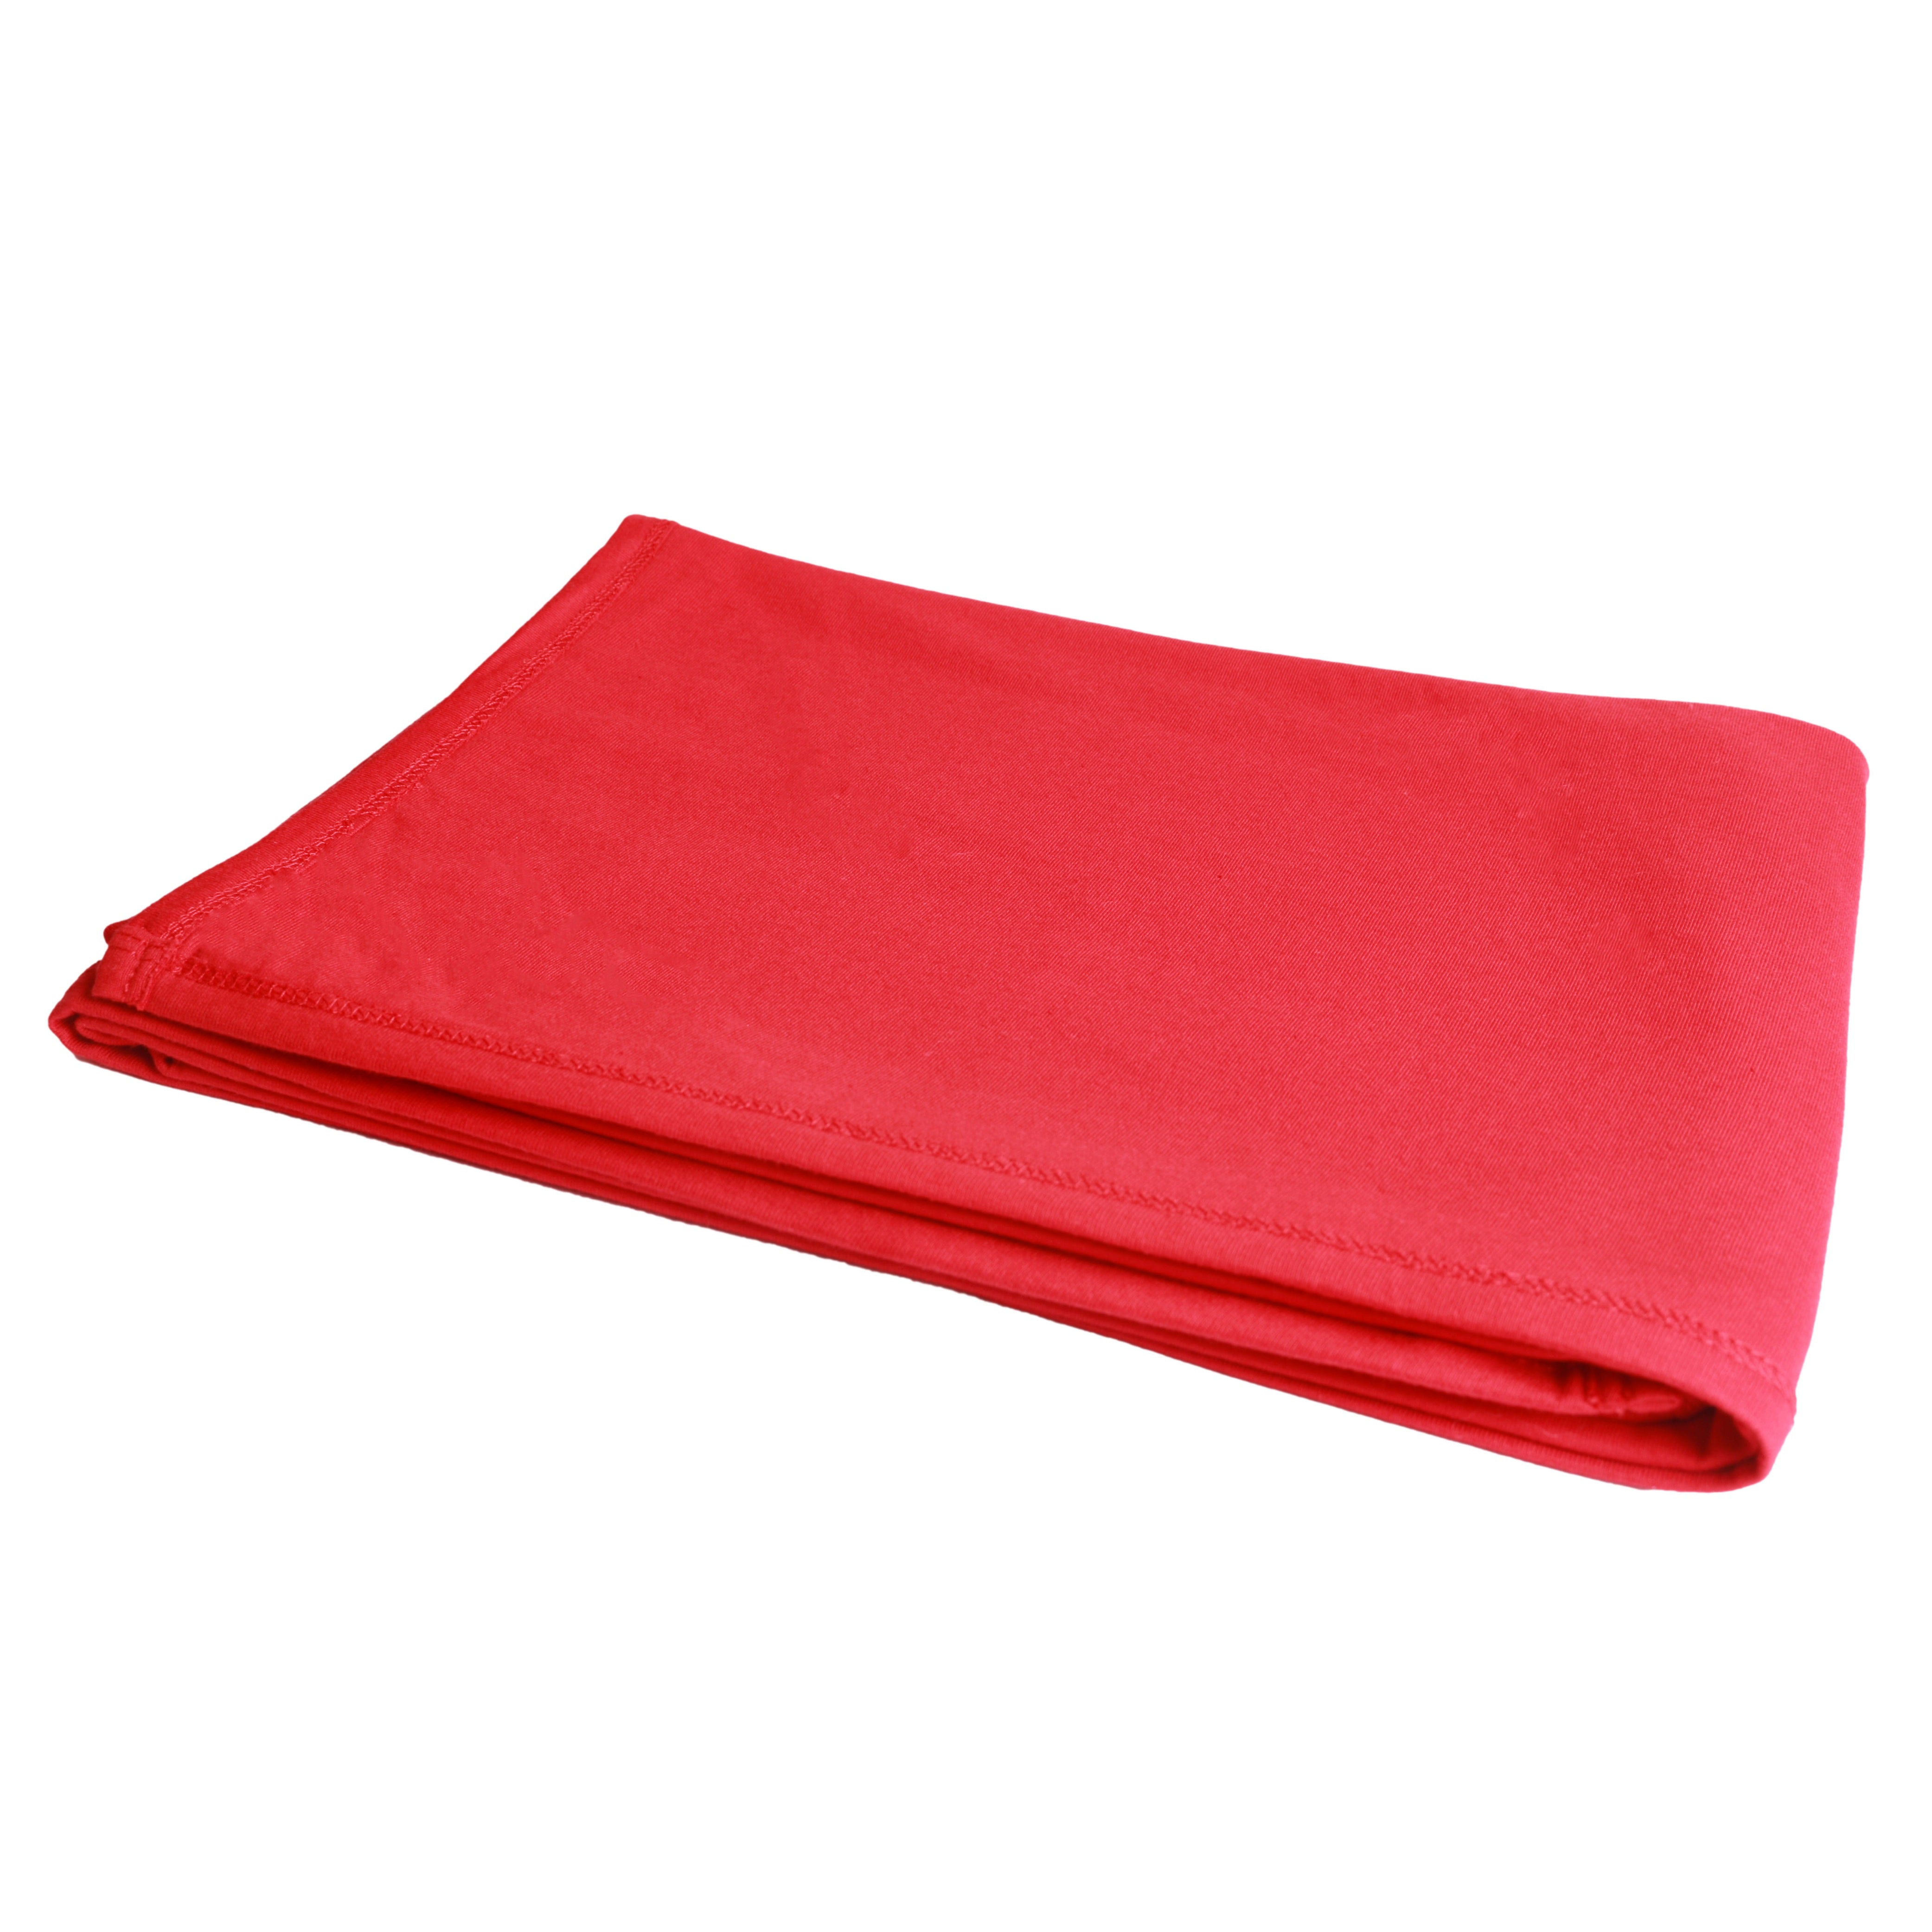 Little By Little 100% Anti Viral, Cotton, Reusable, Anti bacterial & Water Repellent Baby Swaddle - Red